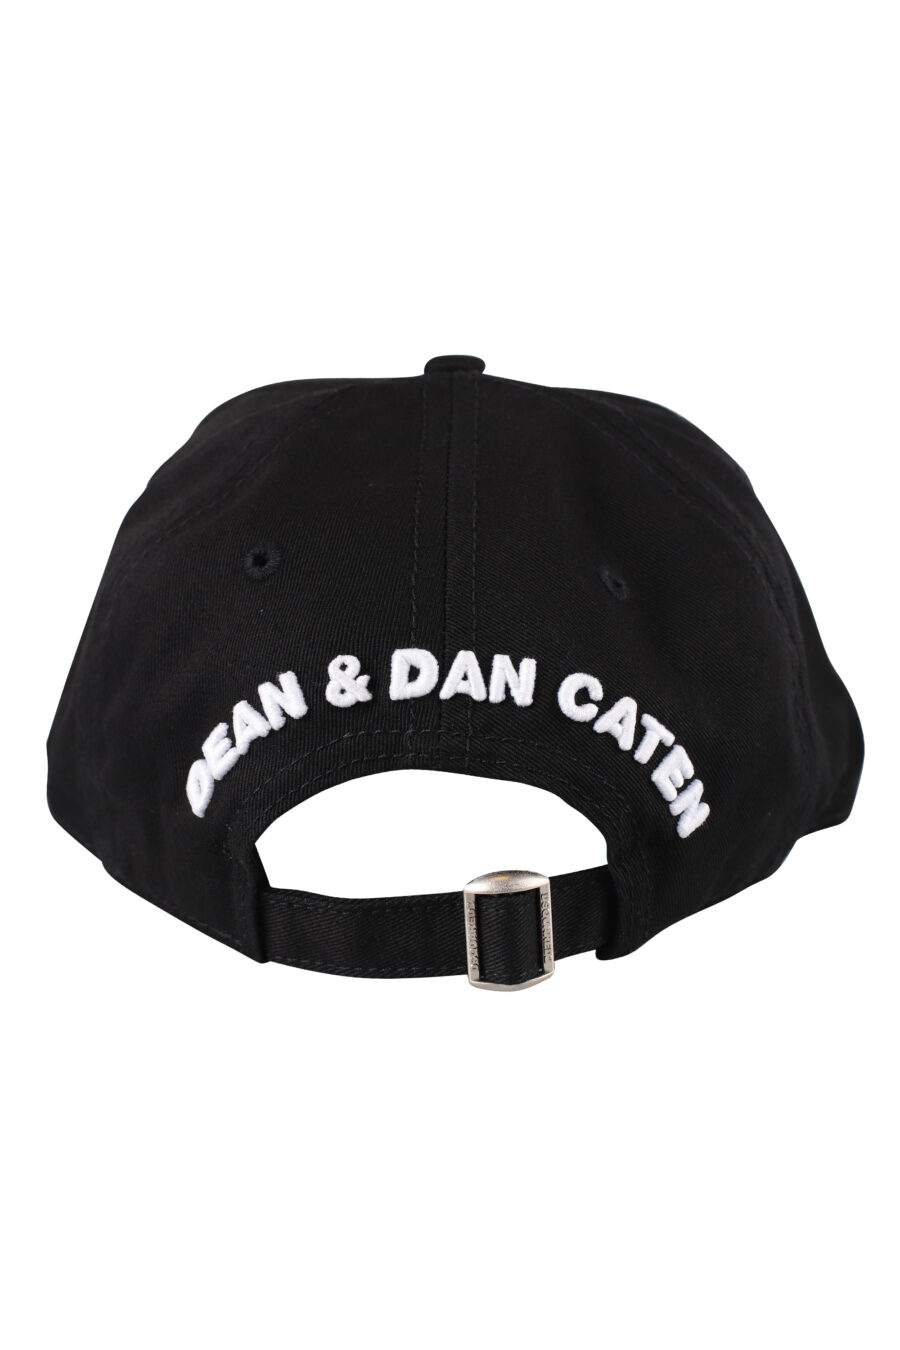 Black cap with white embroidered logo - IMG 1240